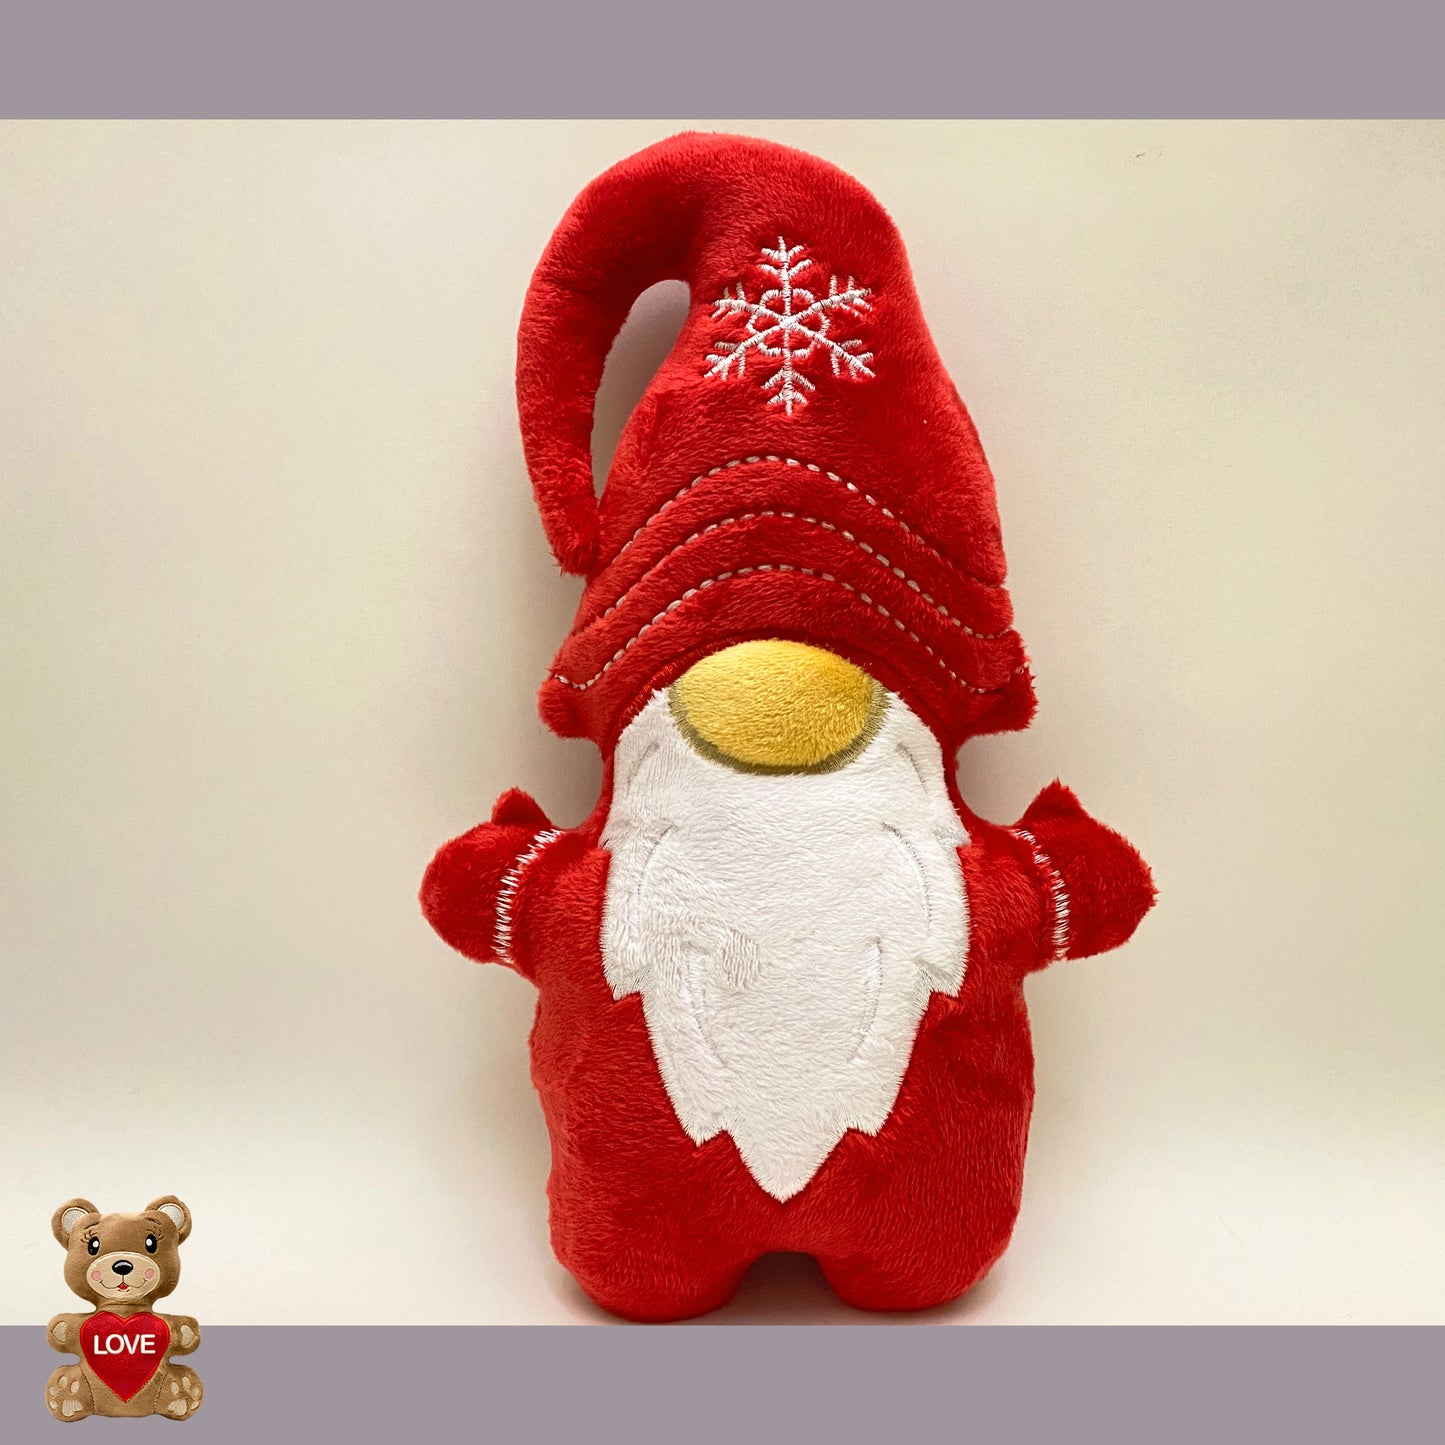 Personalised embroidery Plush Soft Toy Gnome Christmas ,Super cute personalised soft plush toy, Personalised Gift, Unique Personalized Birthday Gifts , Custom Gifts For Children